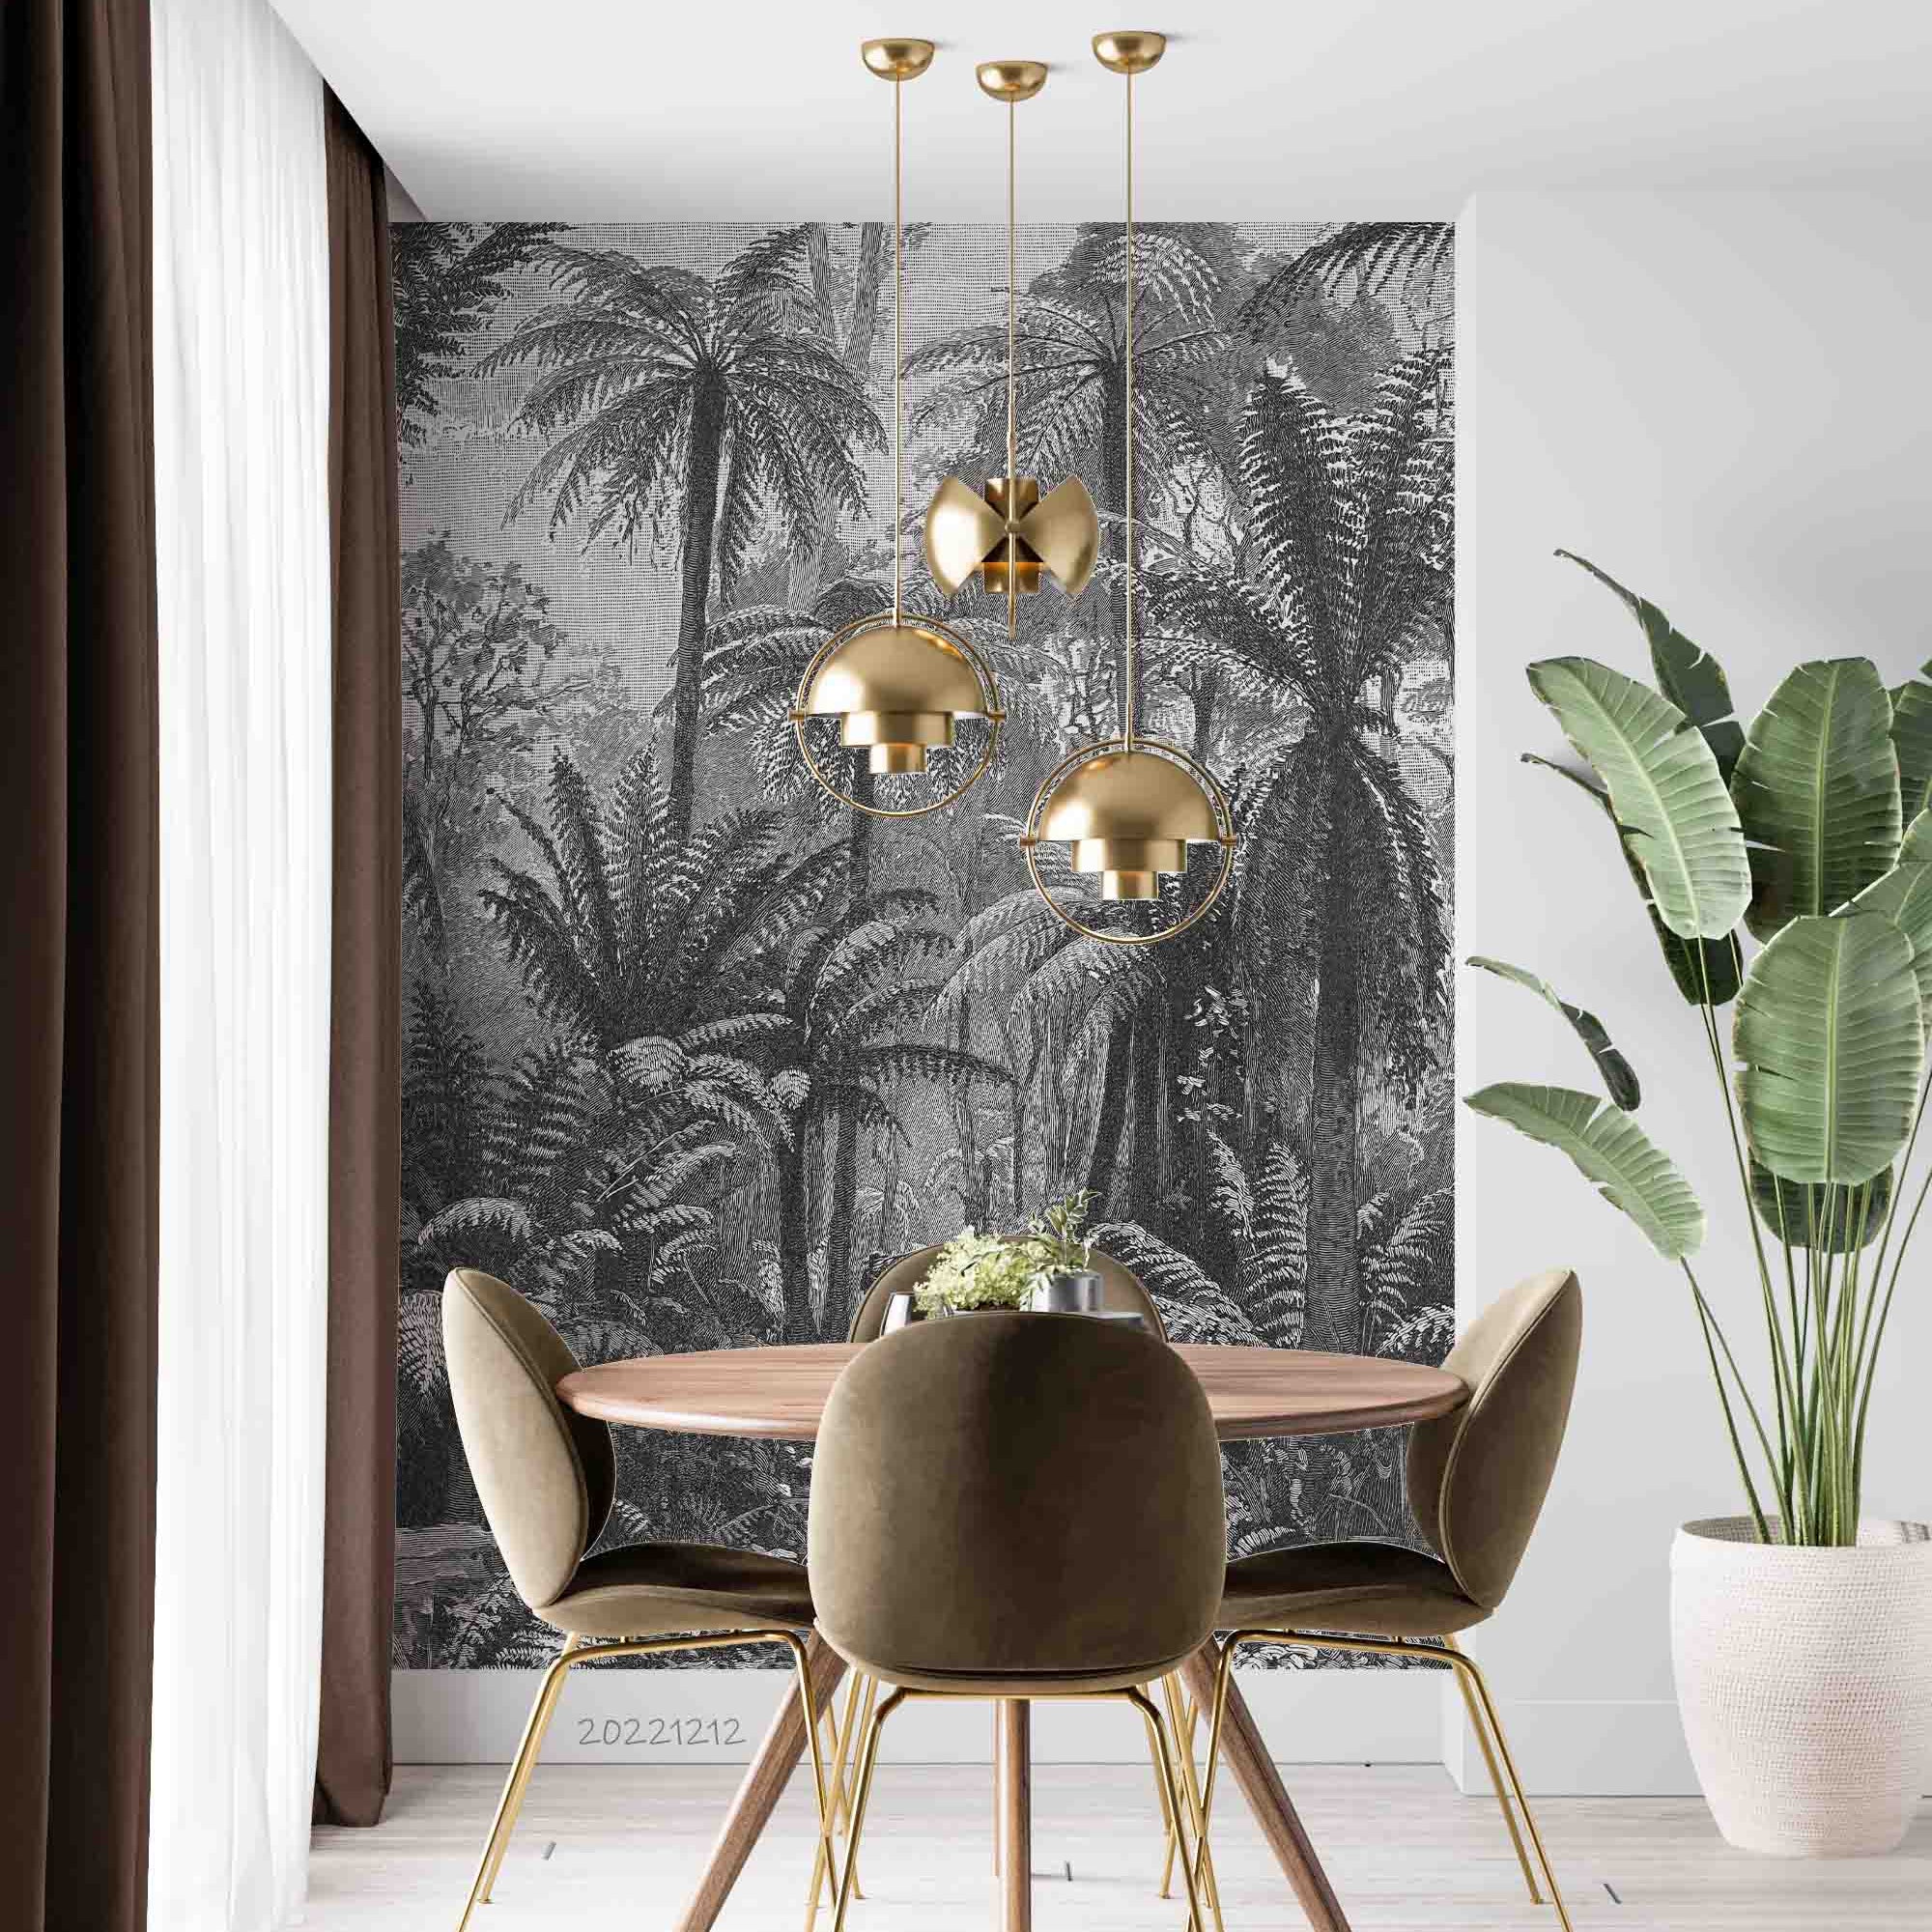 3D Vintage Tropical Forest Coconut Tree Wall Mural Wallpaper GD 1767- Jess Art Decoration